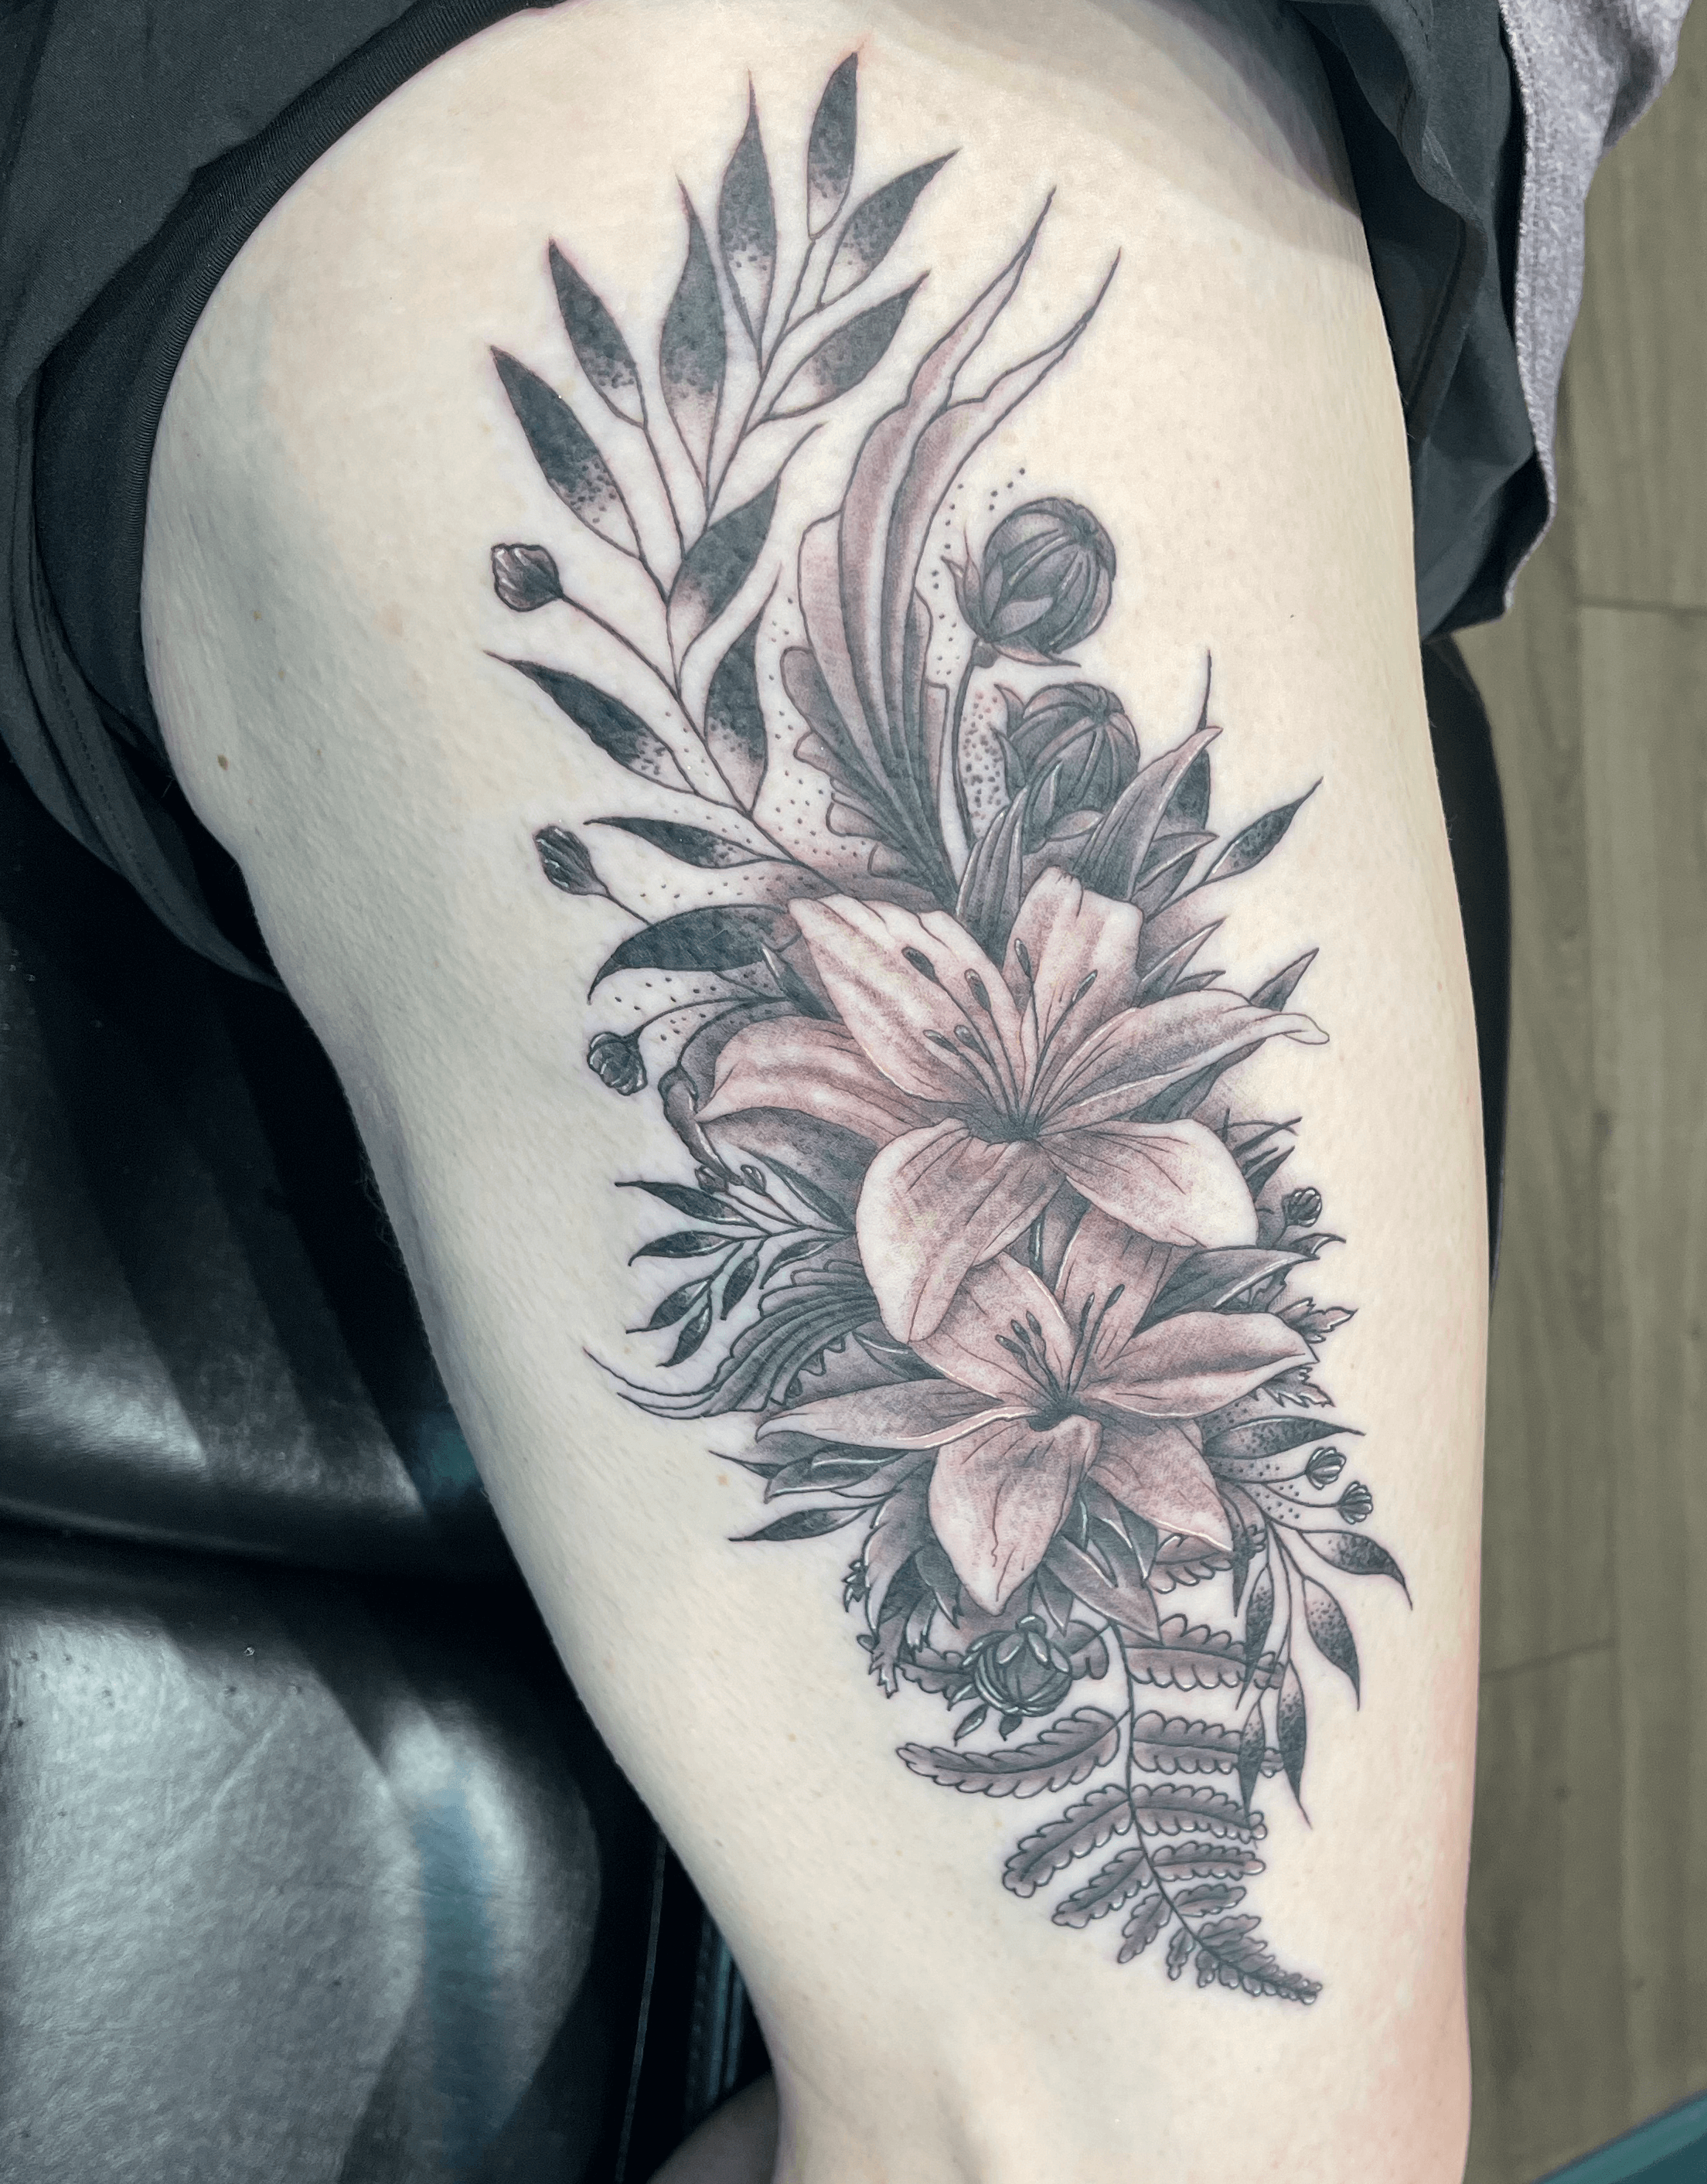 Floral tattoo with two lilies in the centre in black and grey on the thigh